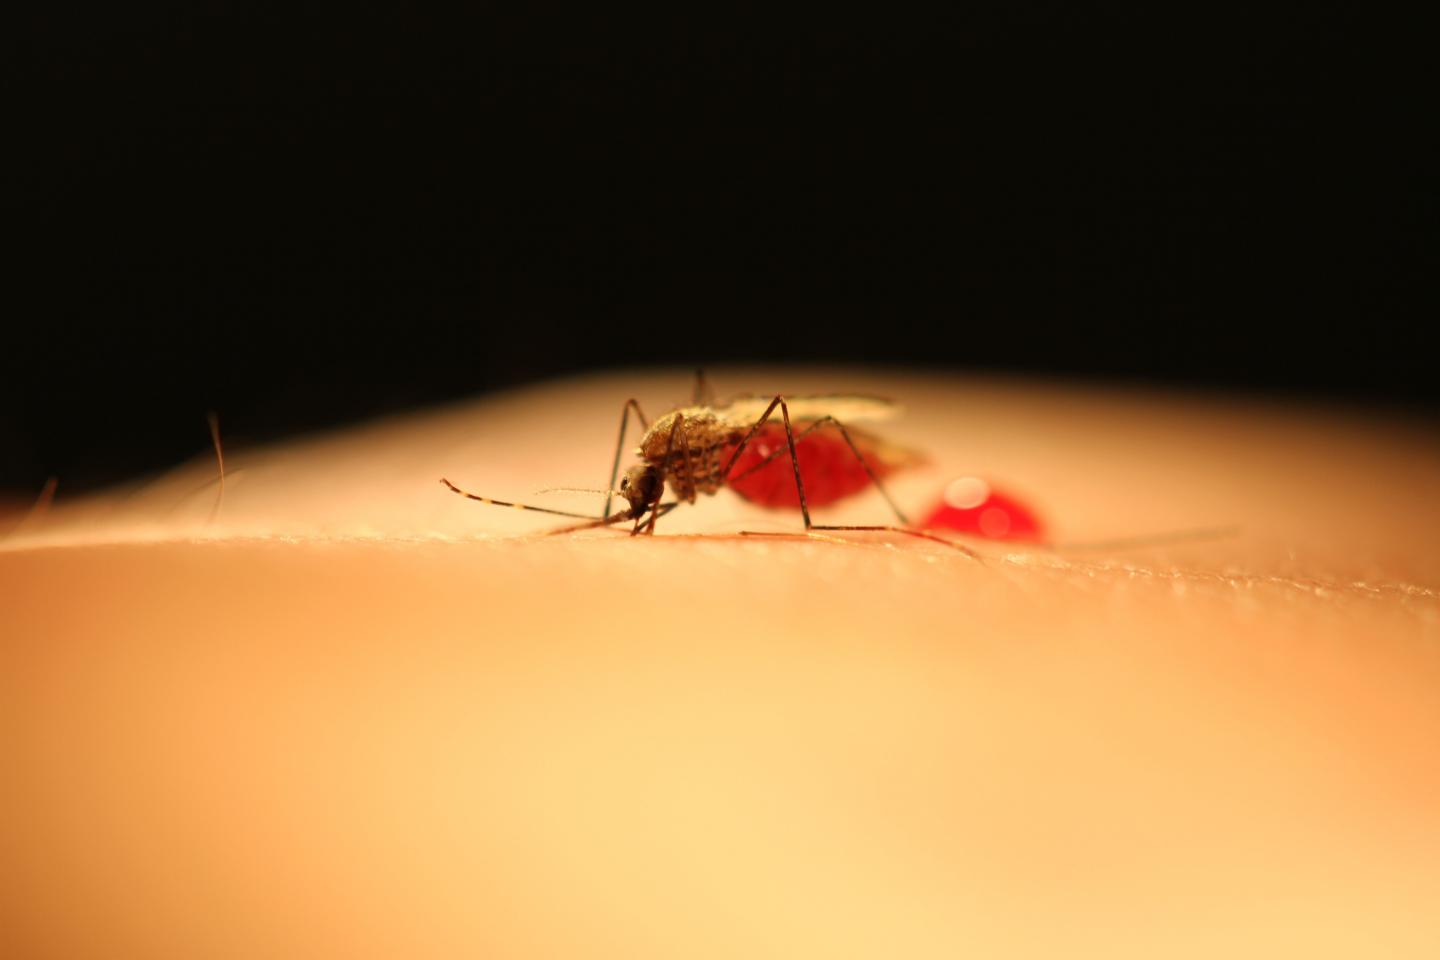 Blocking Hormone Activity in Mosquitoes Could Help Reduce Malaria Spread